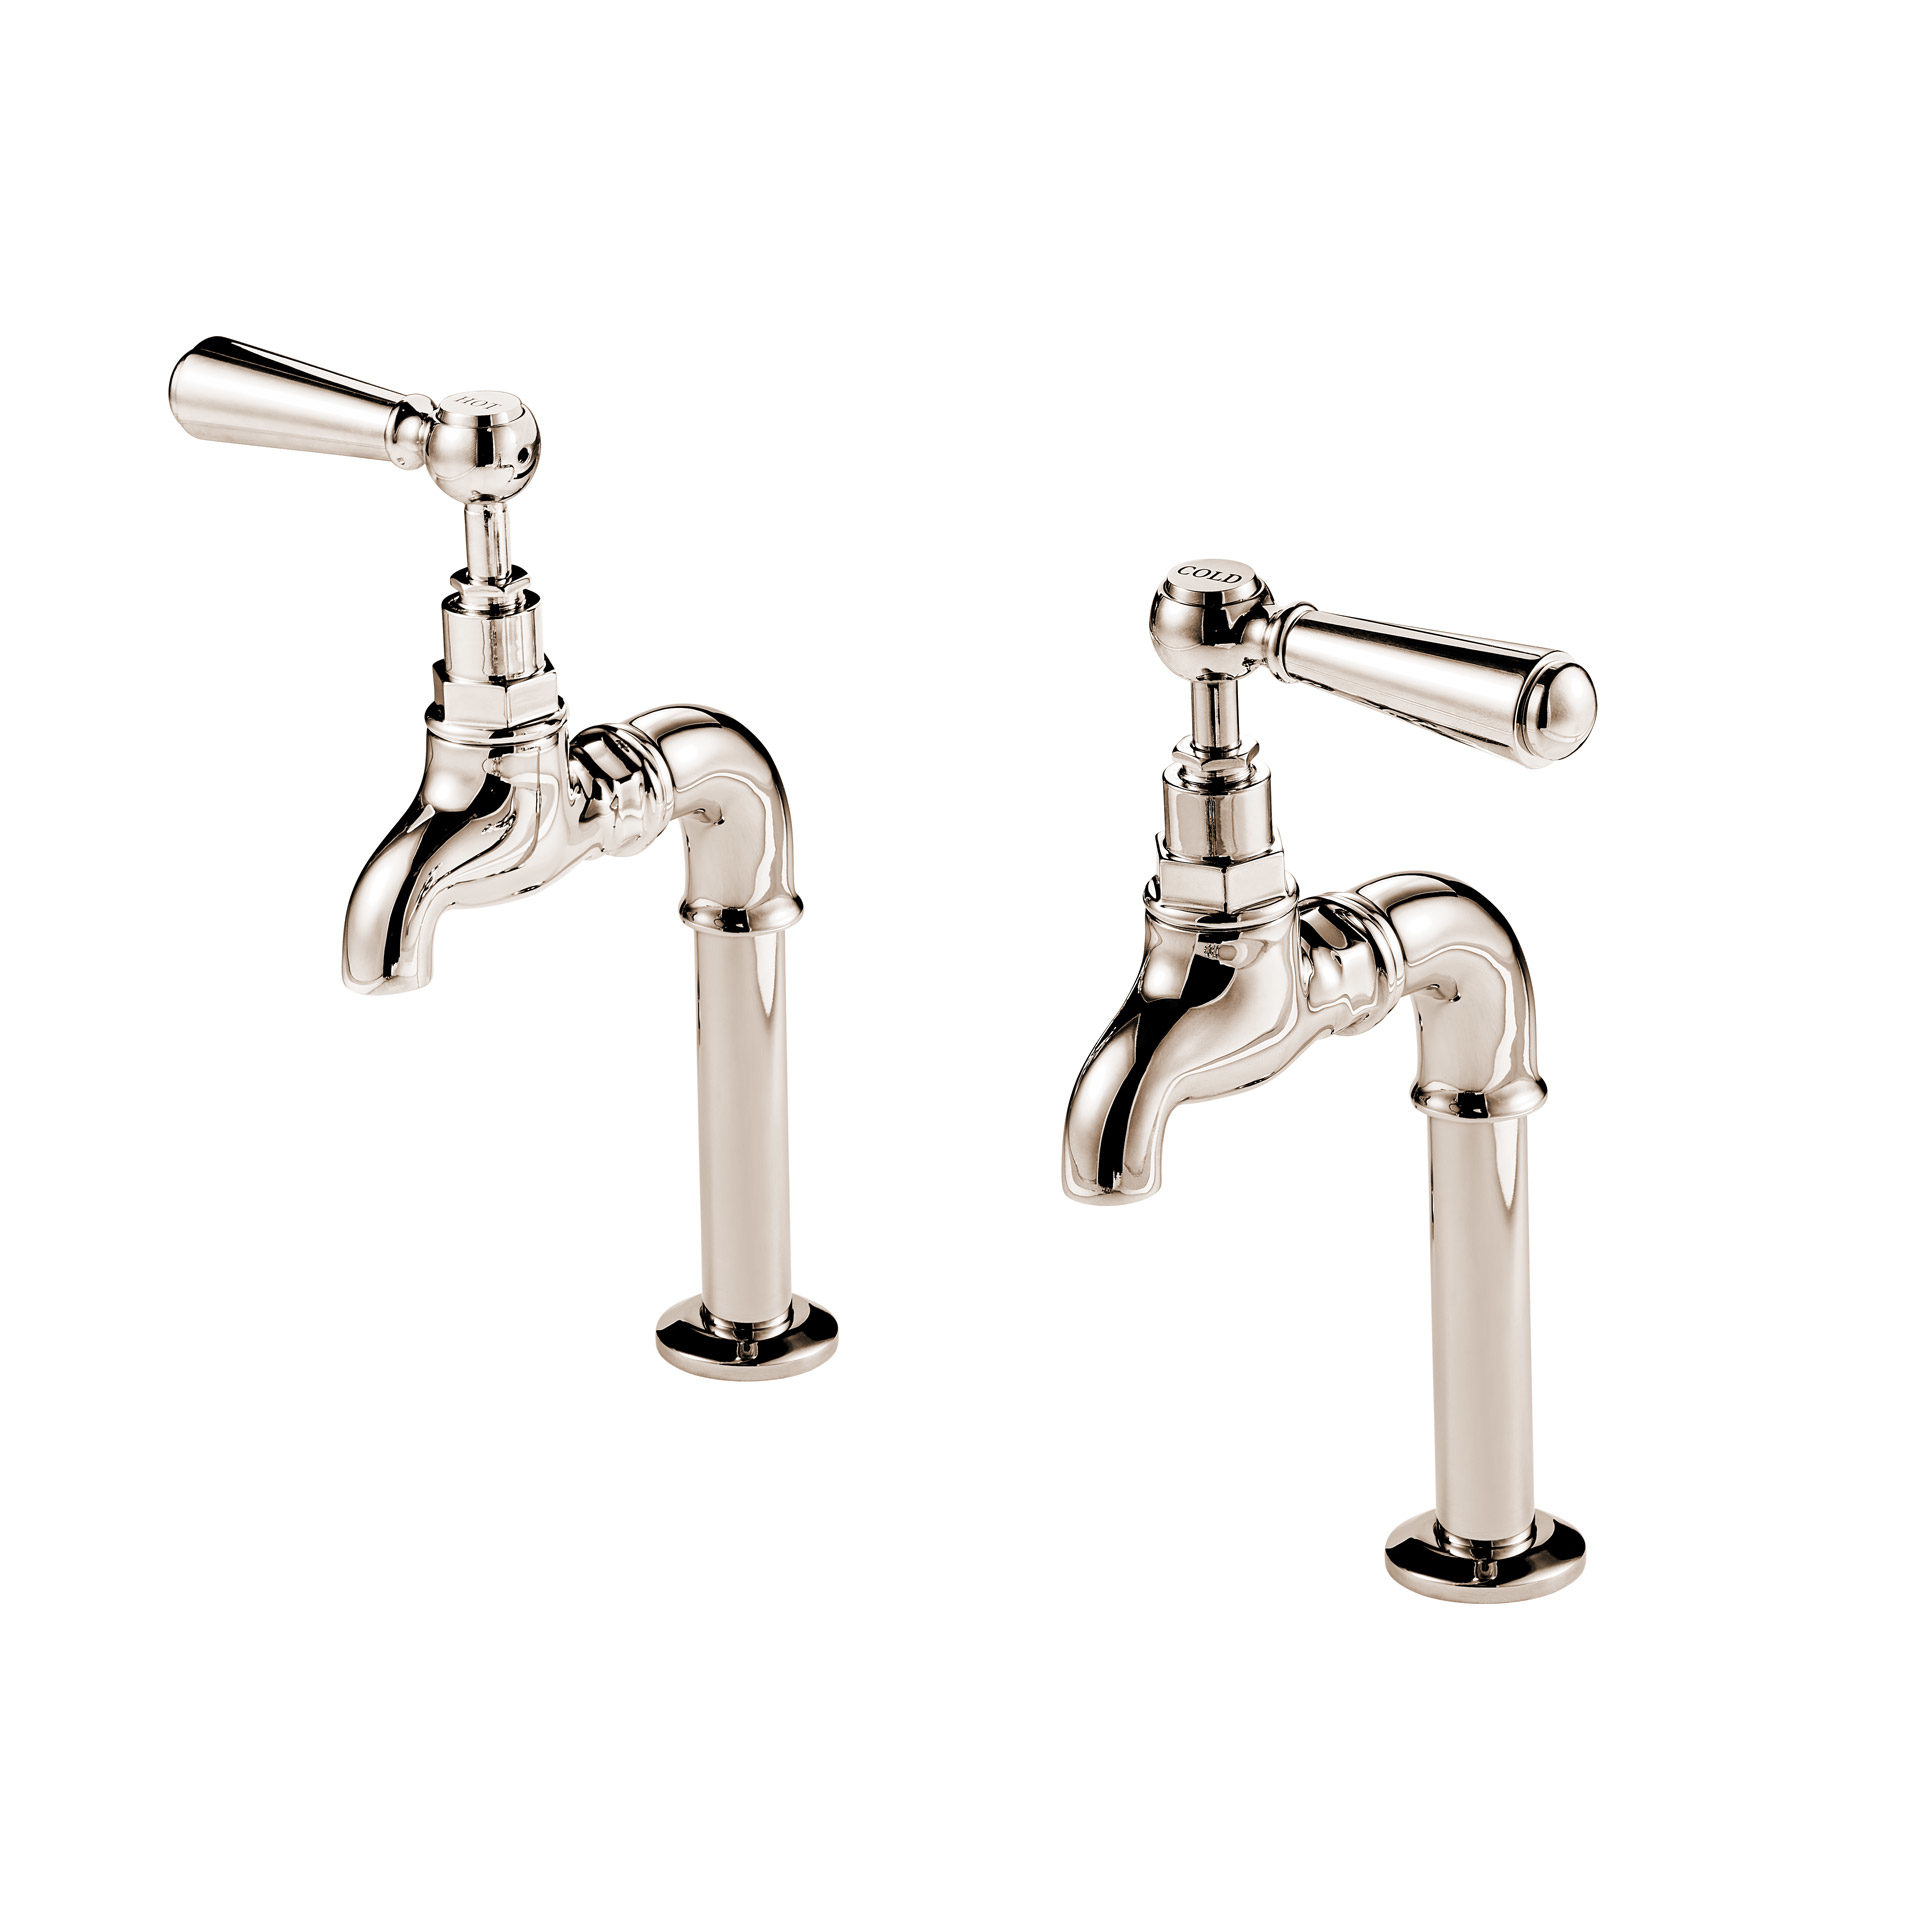 Barber Wilsons 6 Inch Deck Mounted Bib Taps with Metal Lever in Polished Nickel, 1900's Style